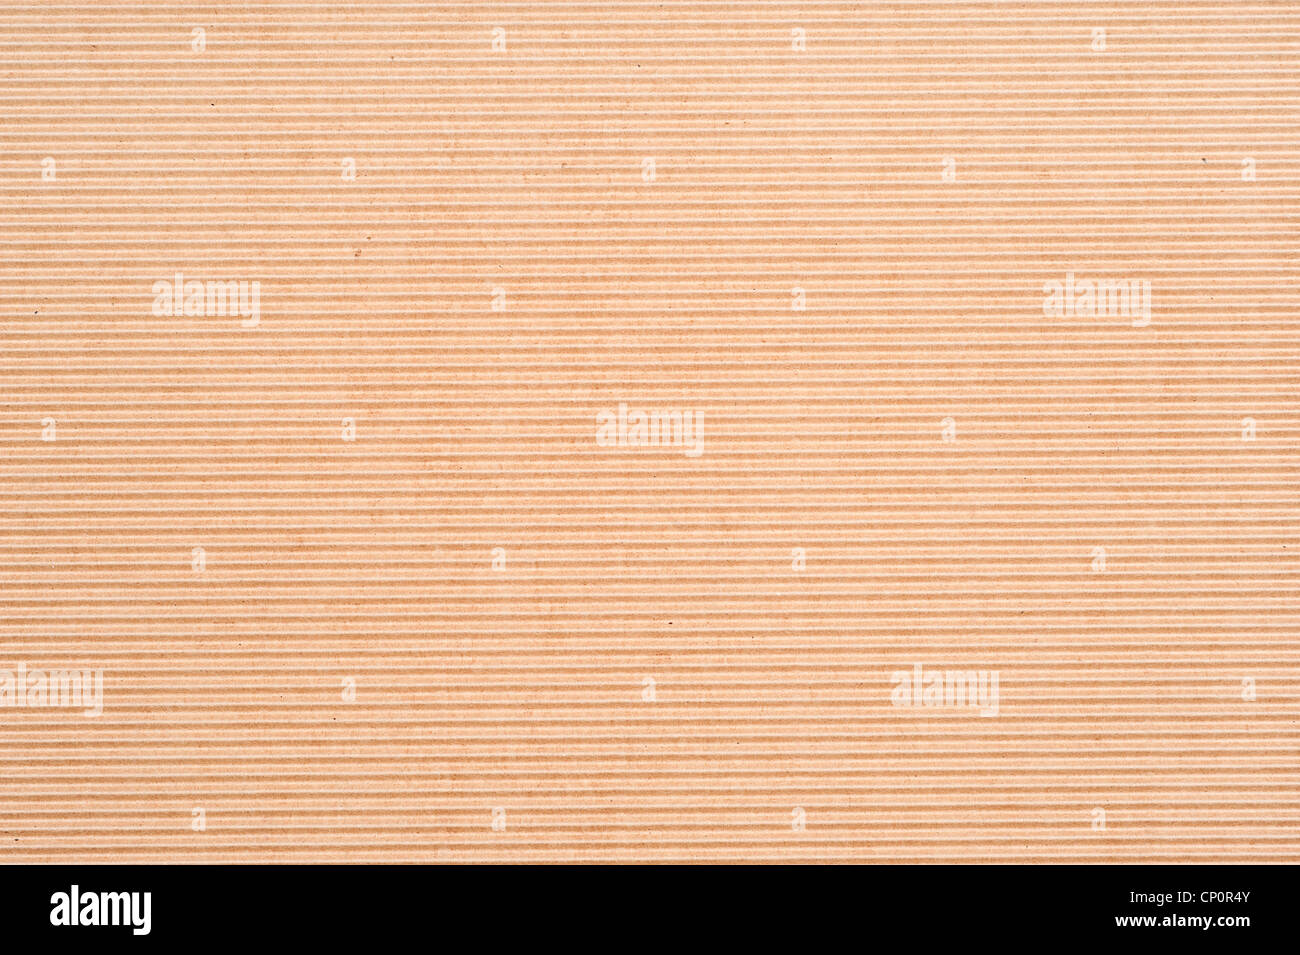 The side of a corrugated cardboard box for use as design element or background. Stock Photo